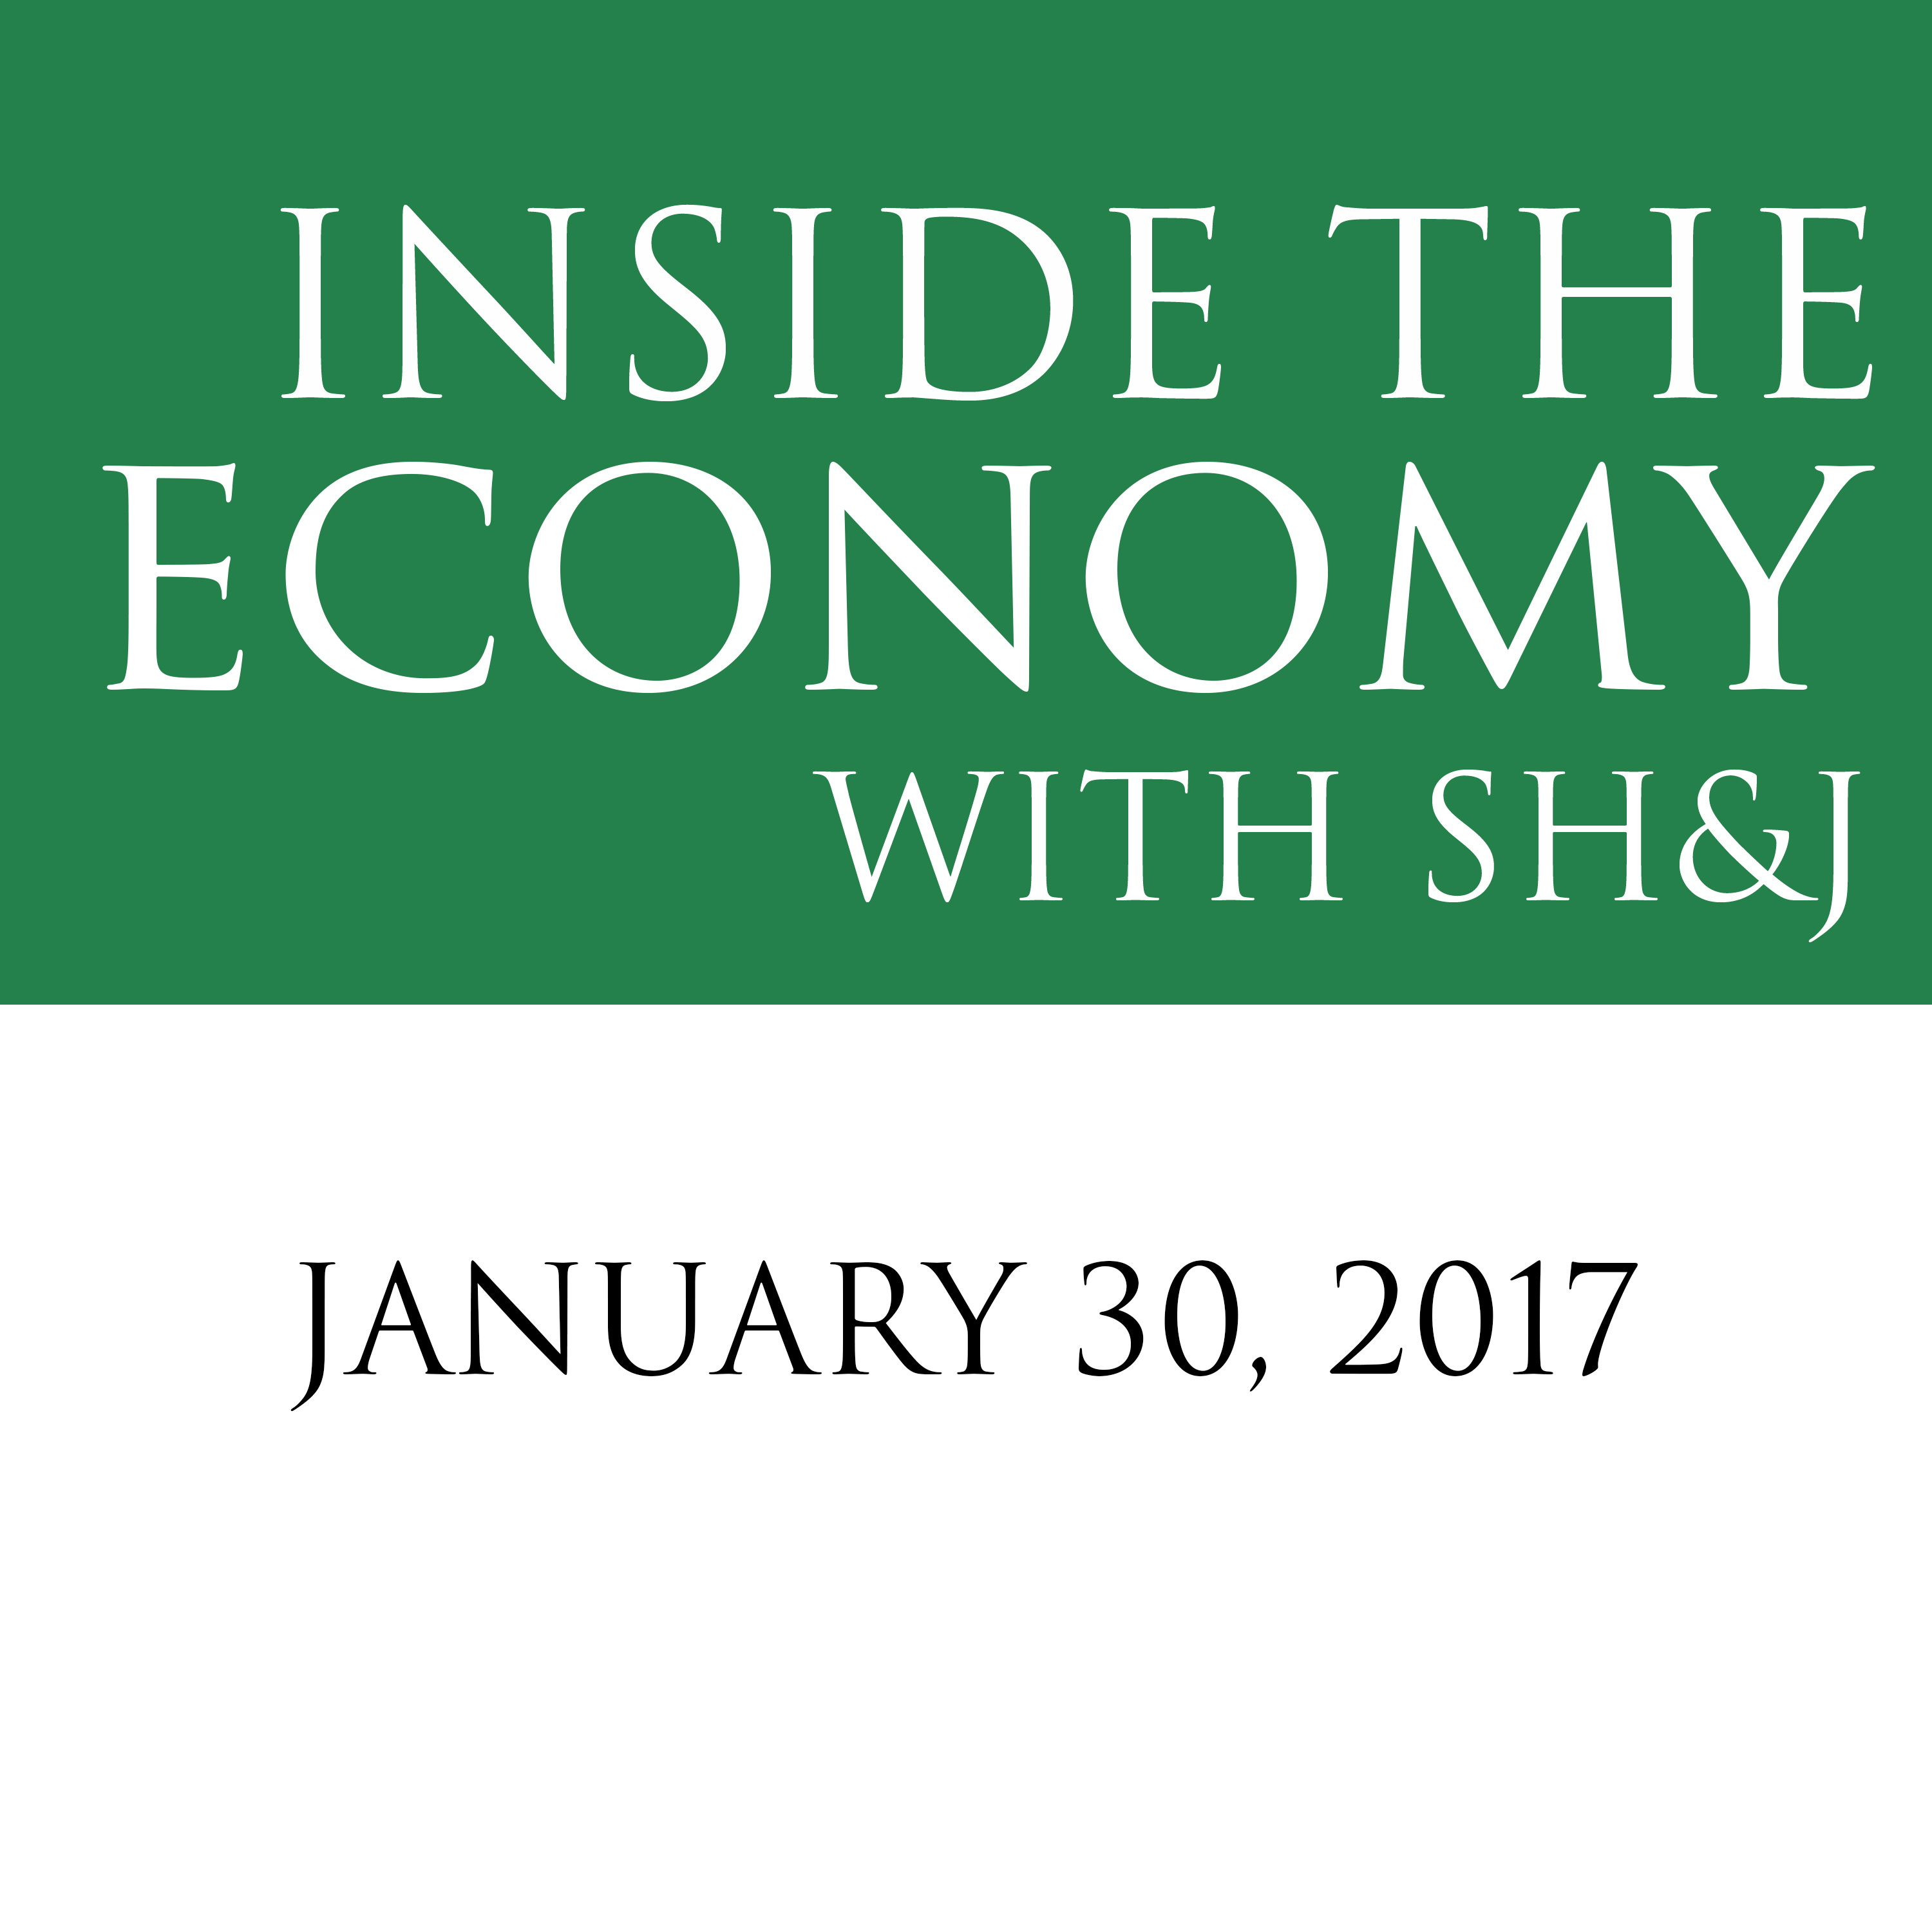 January 30, 2017  --  Inside the Economy with SH&J